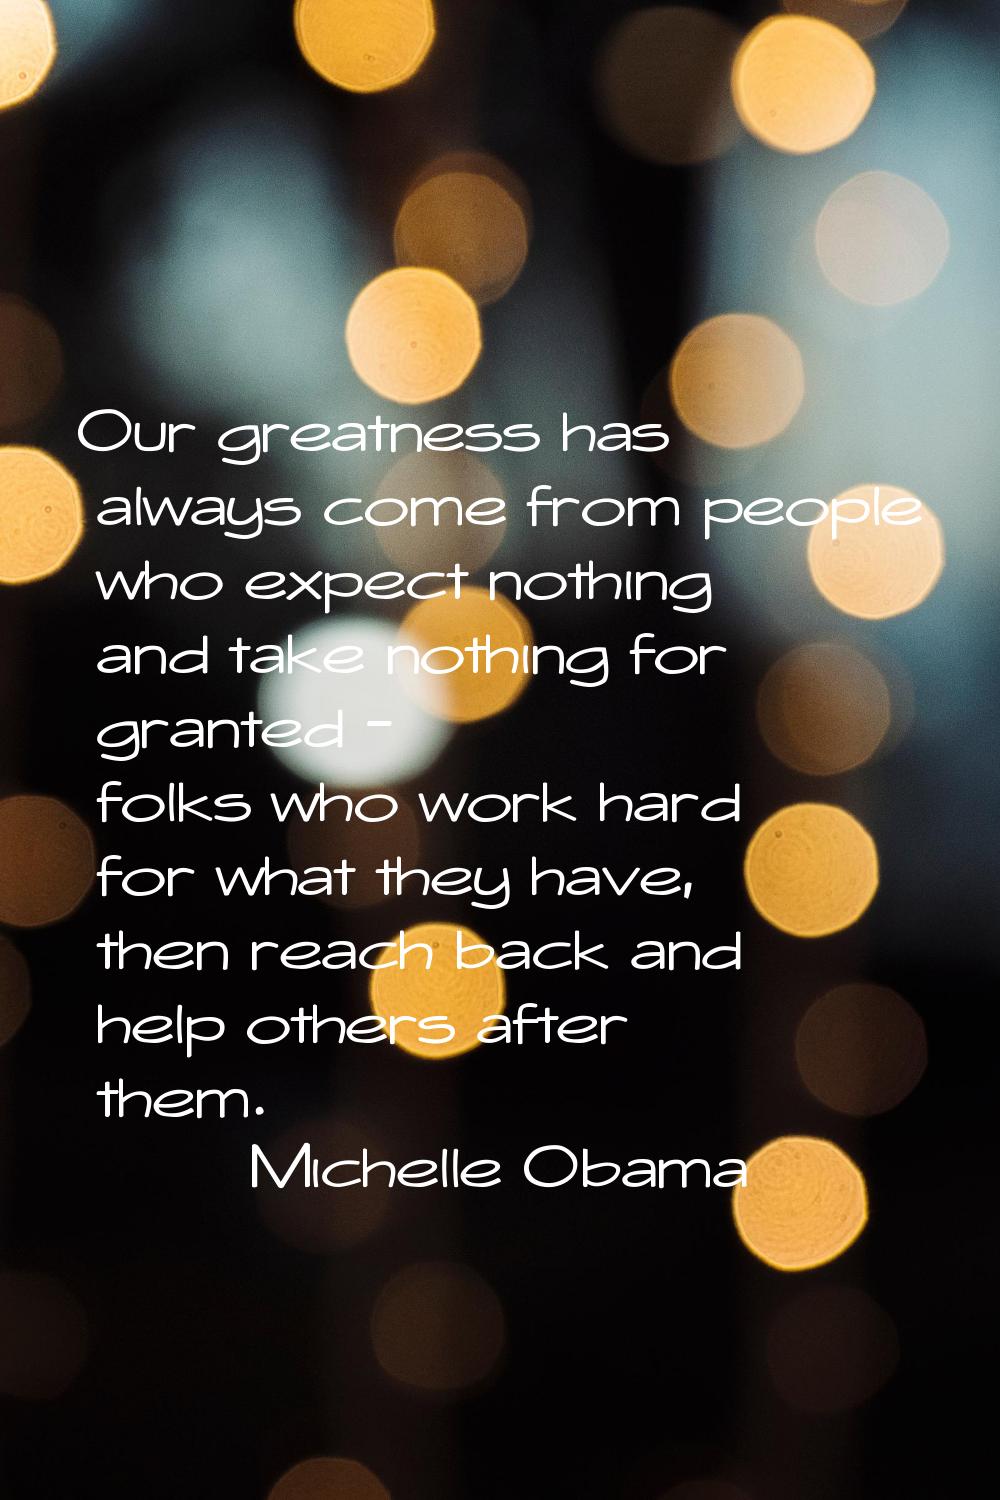 Our greatness has always come from people who expect nothing and take nothing for granted - folks w